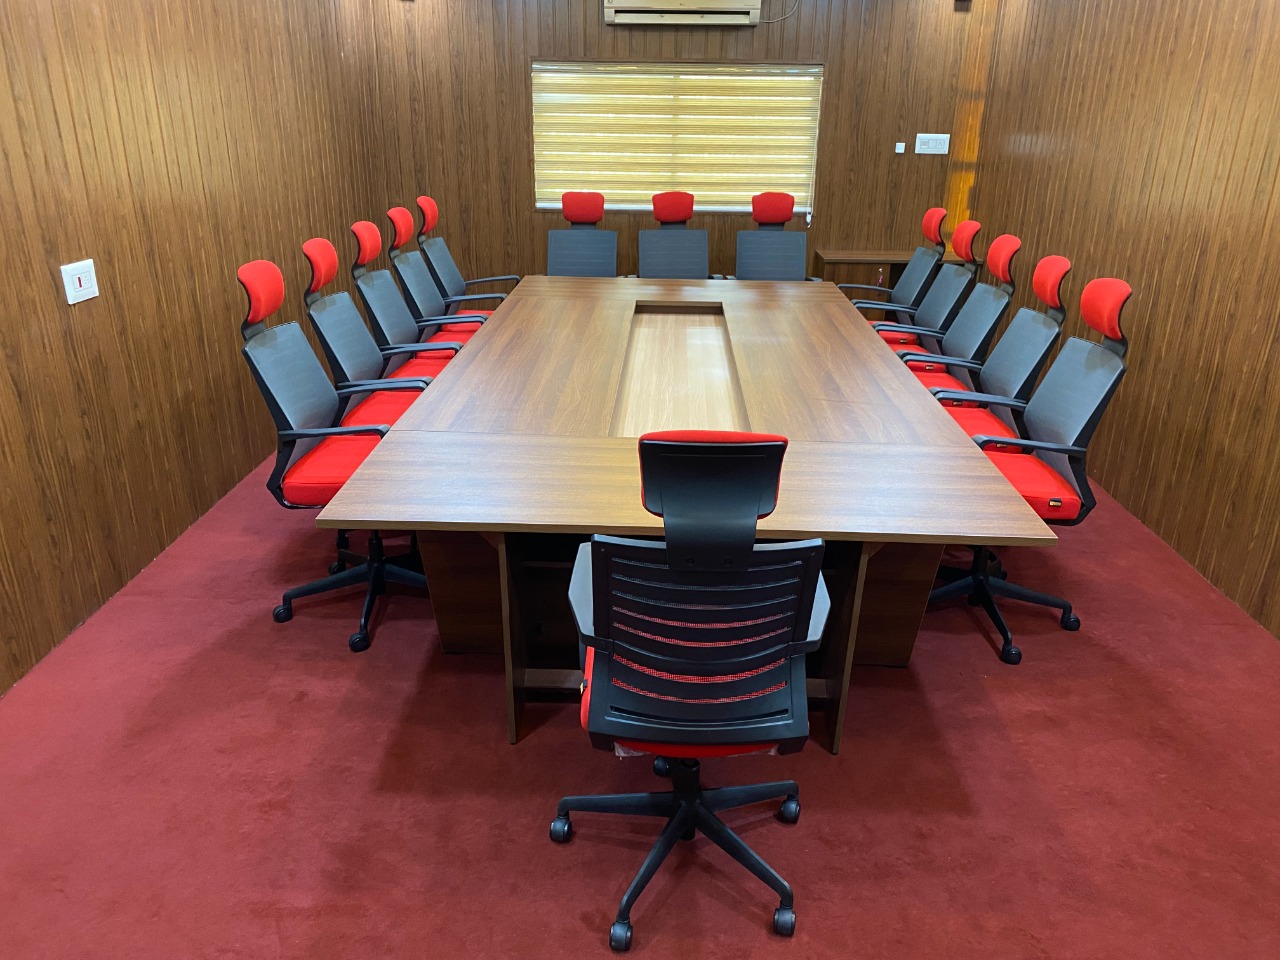 Conference hall tables and chairs